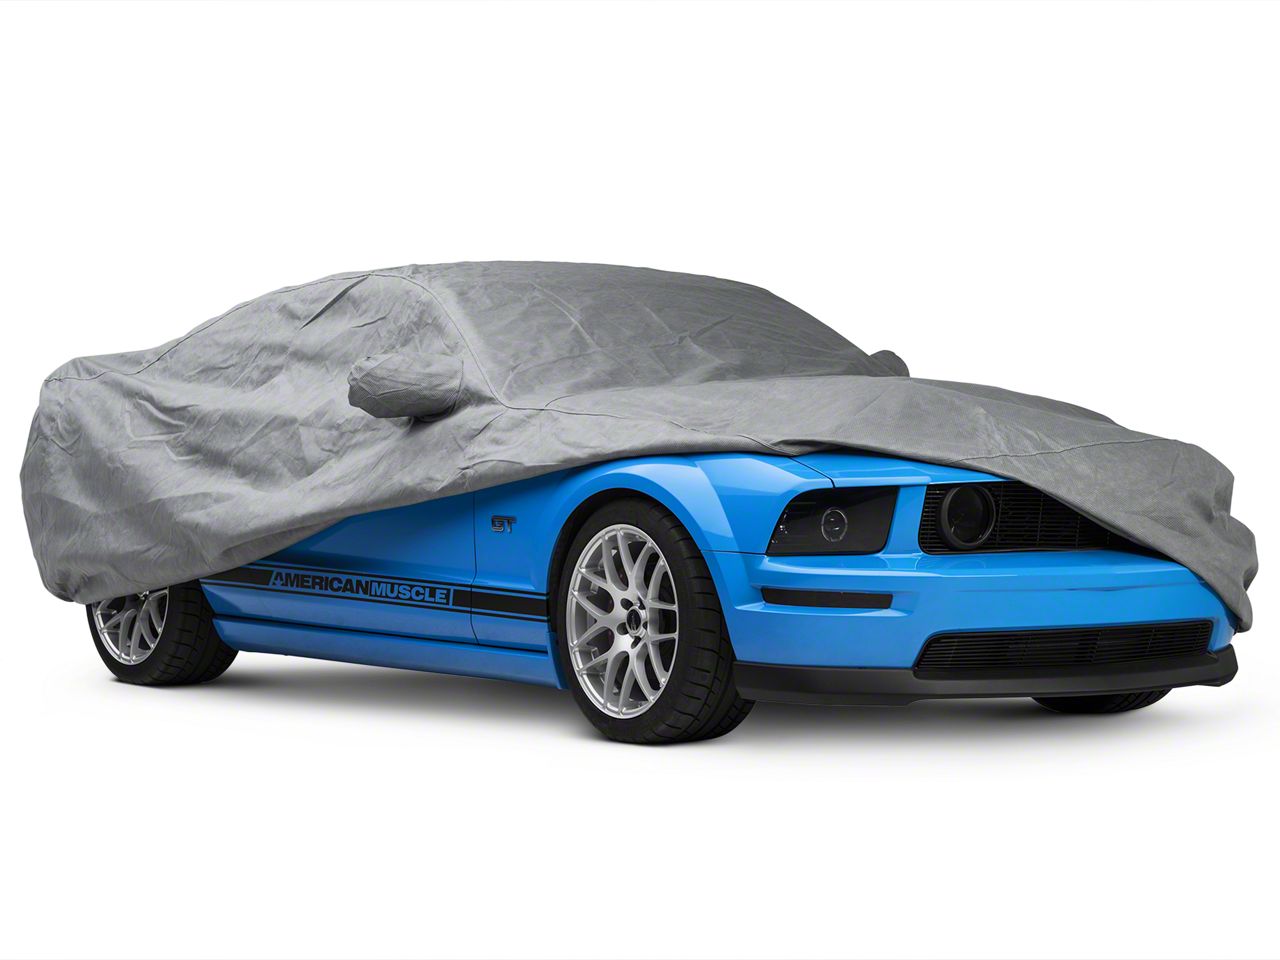 Details about   MCarcovers Fit Car Cover Sun ShadeFits 2005-2009 Ford Mustang MBSF_144468